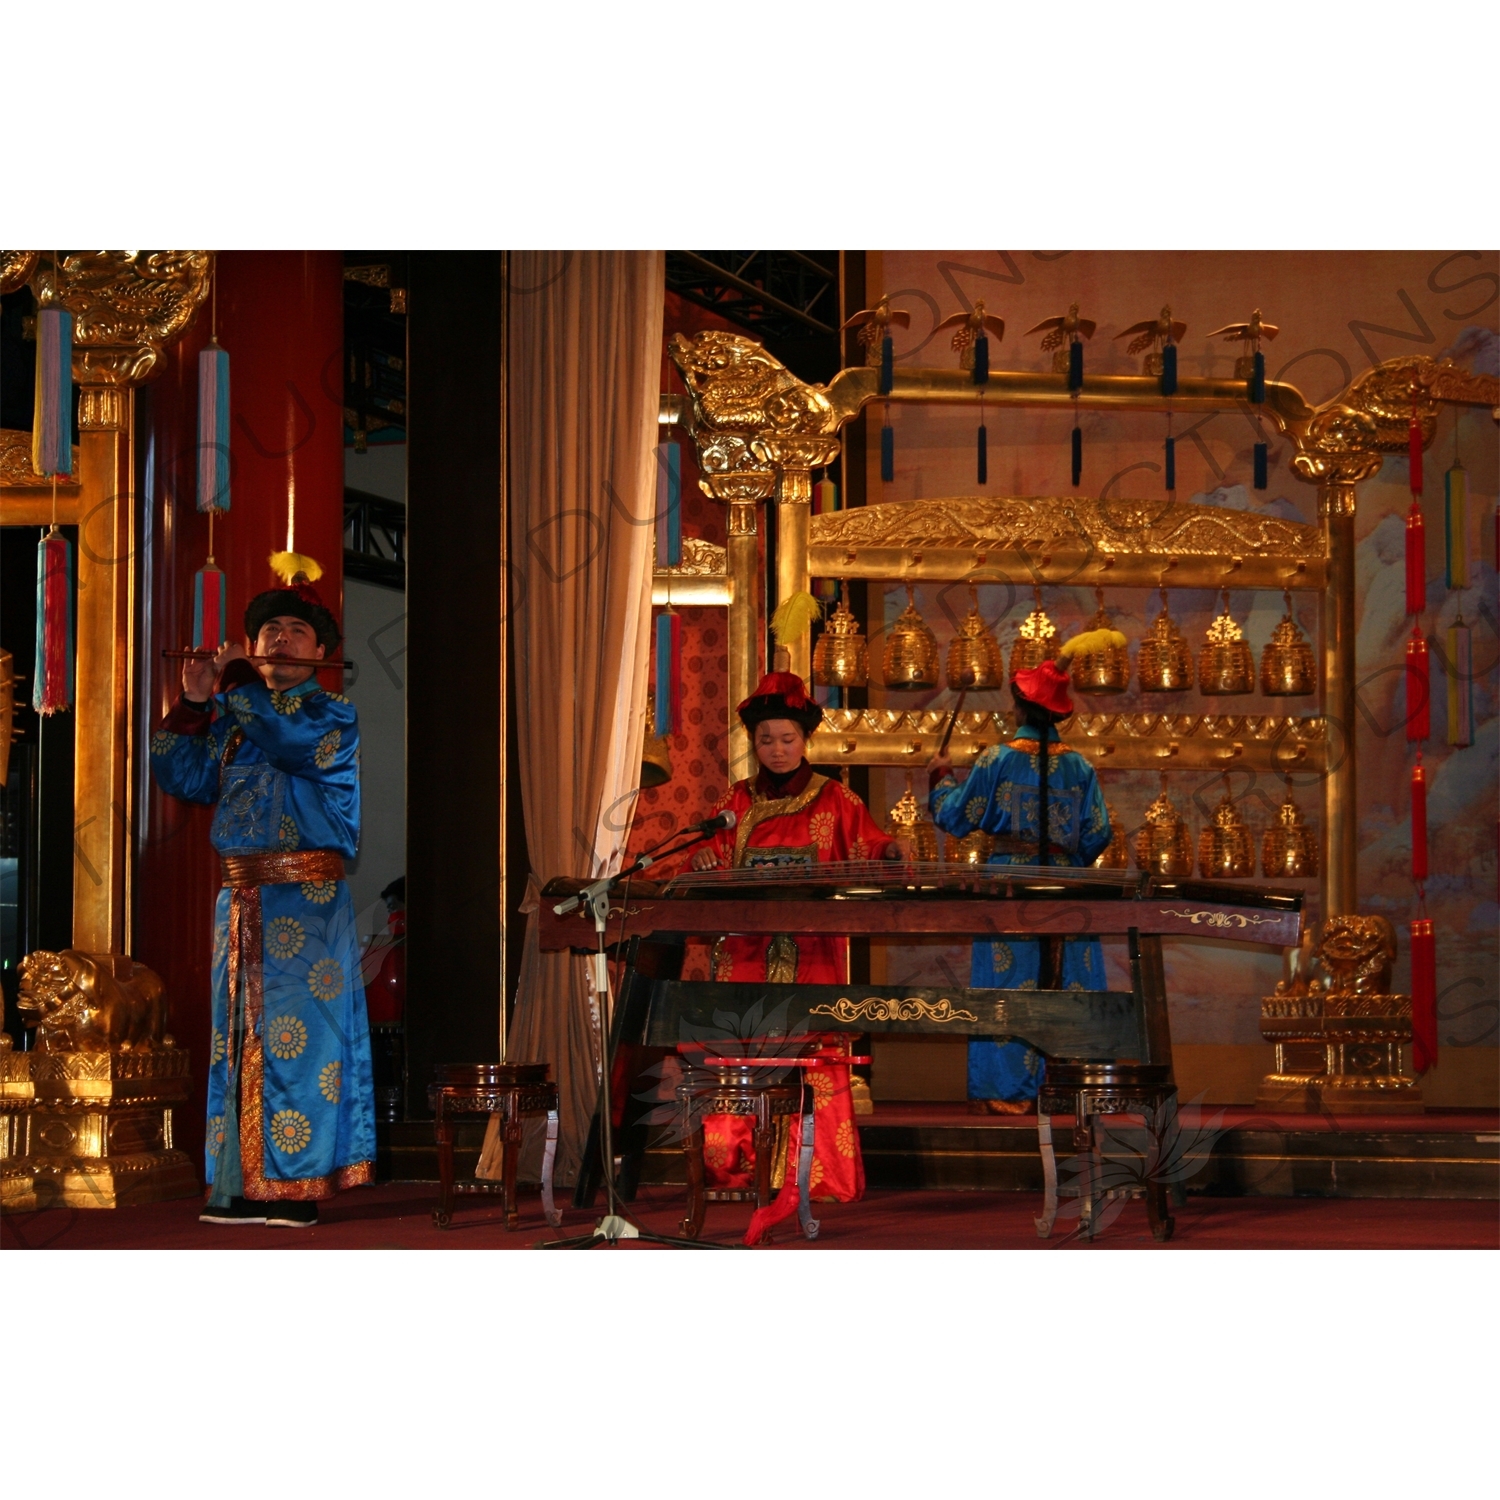 Performers Playing Classical Chinese Instruments in the Divine Music Administration (Shenyue Shu) in the Temple of Heaven (Tiantan) in Beijing